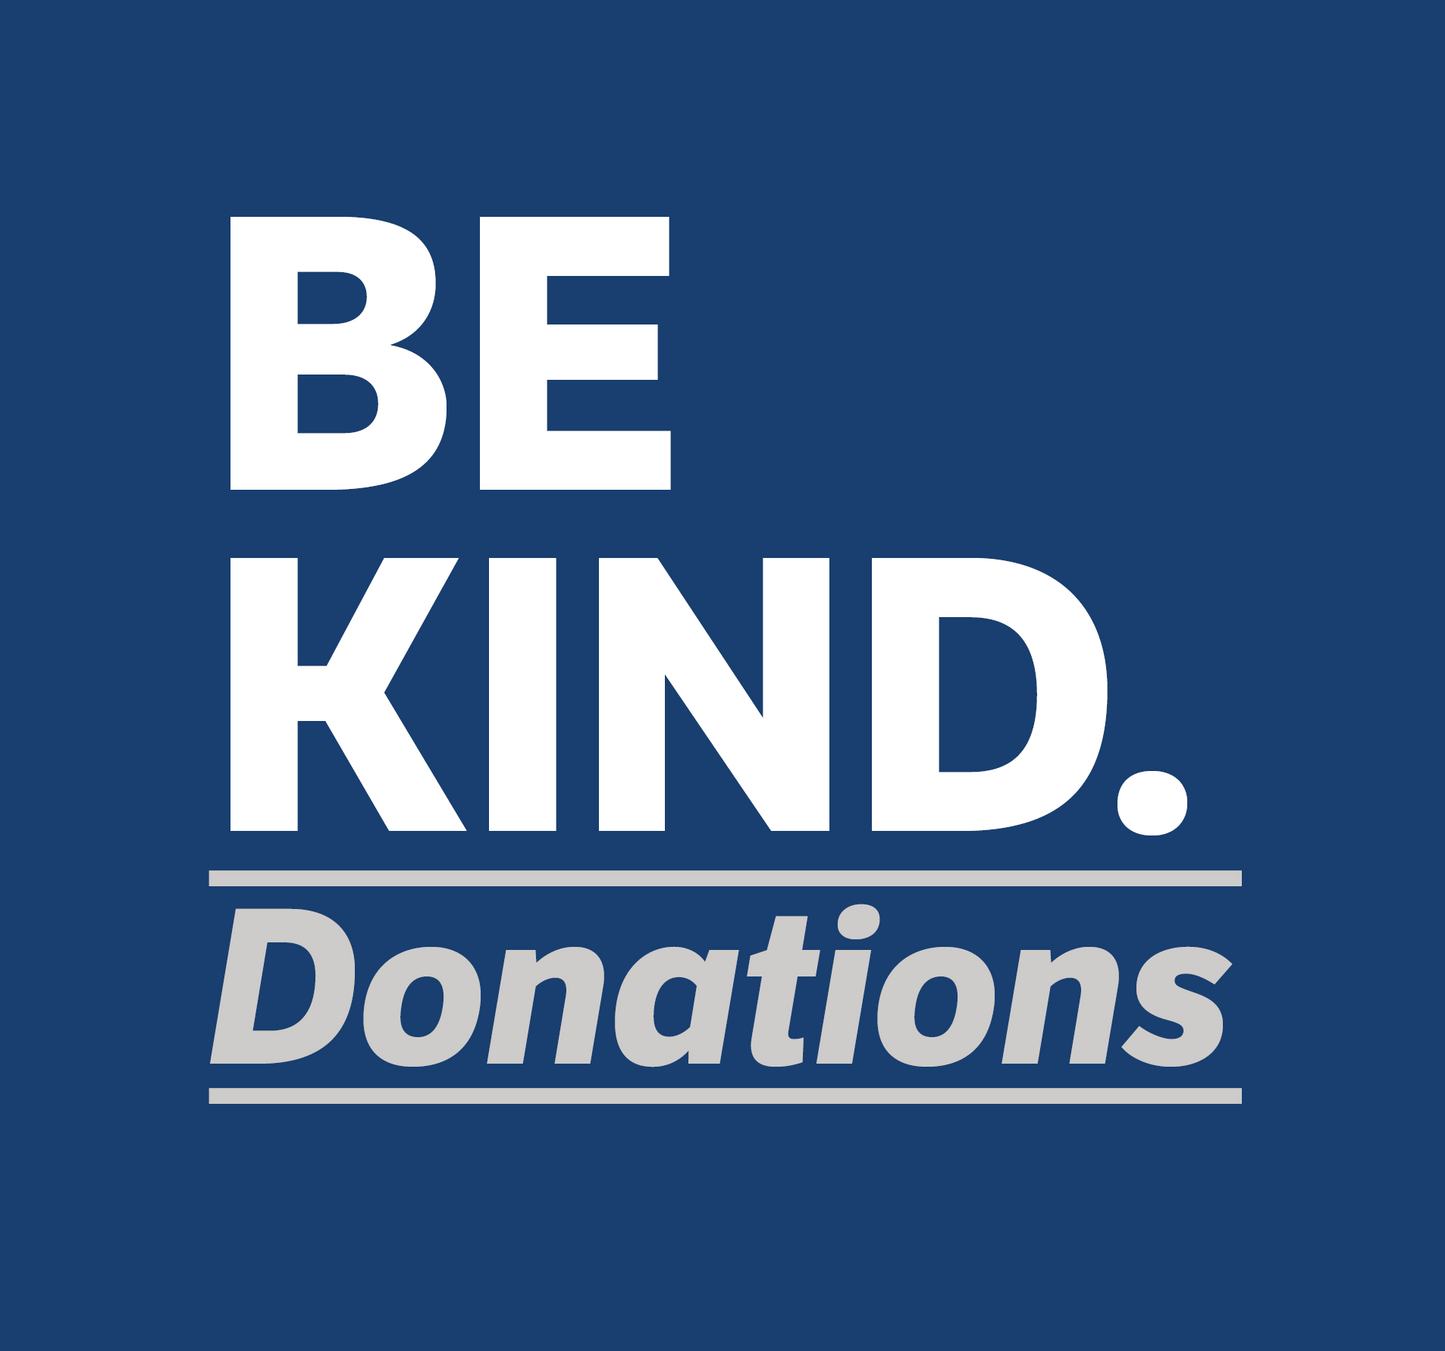 Be Kind. Donation(s)